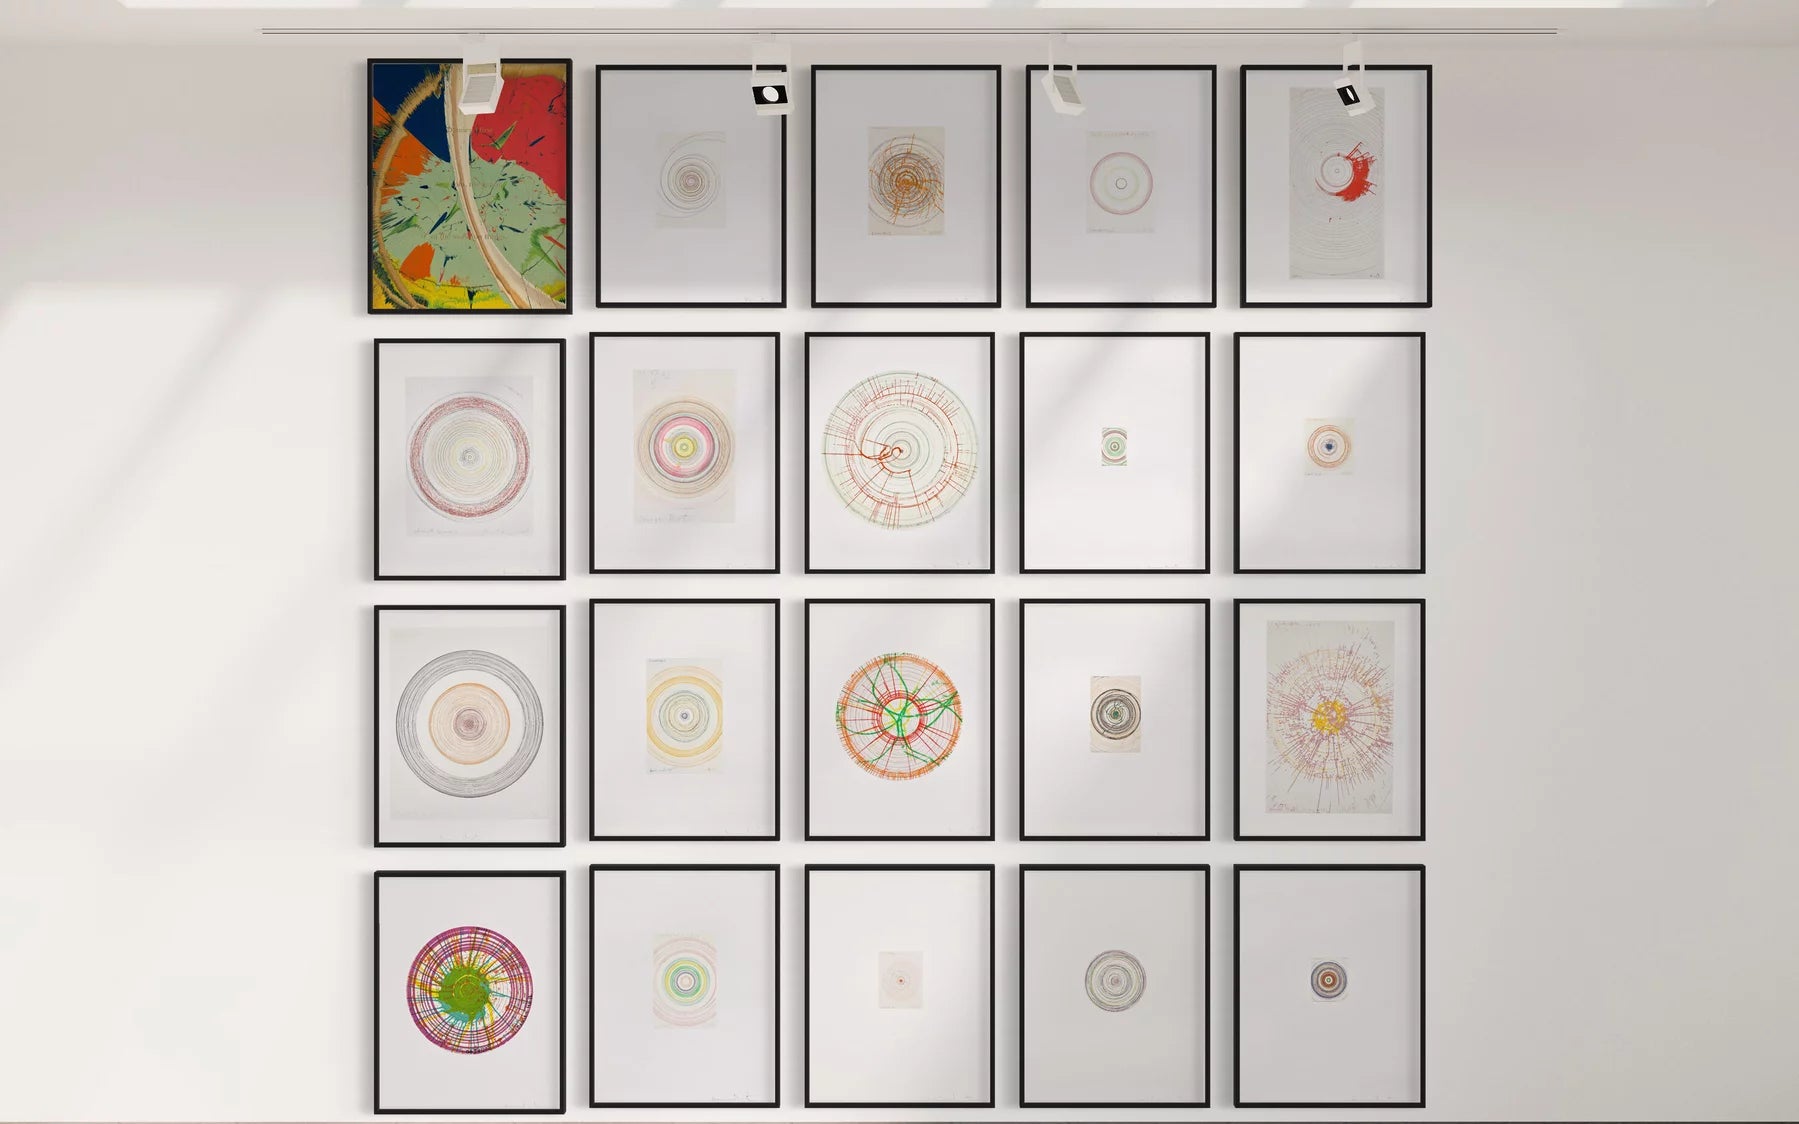 Damien Hirst - In a Spin, the Action of the World on Things, Volume I) , 2002